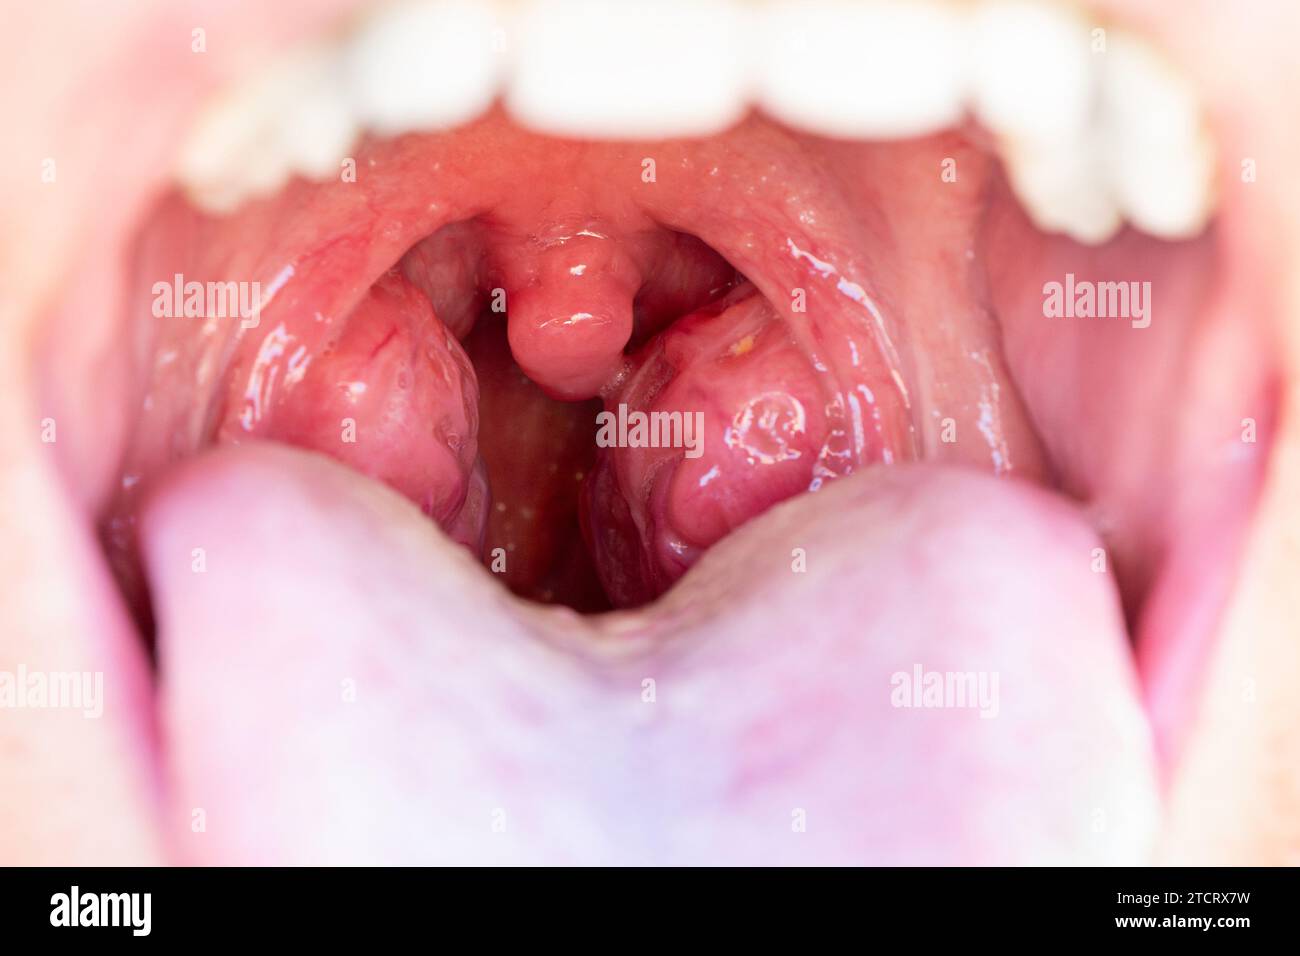 Closeup view of open mouth with tonsils. The child is a patient with large red glands. Tonsils in close-up in the mouth. Stock Photo